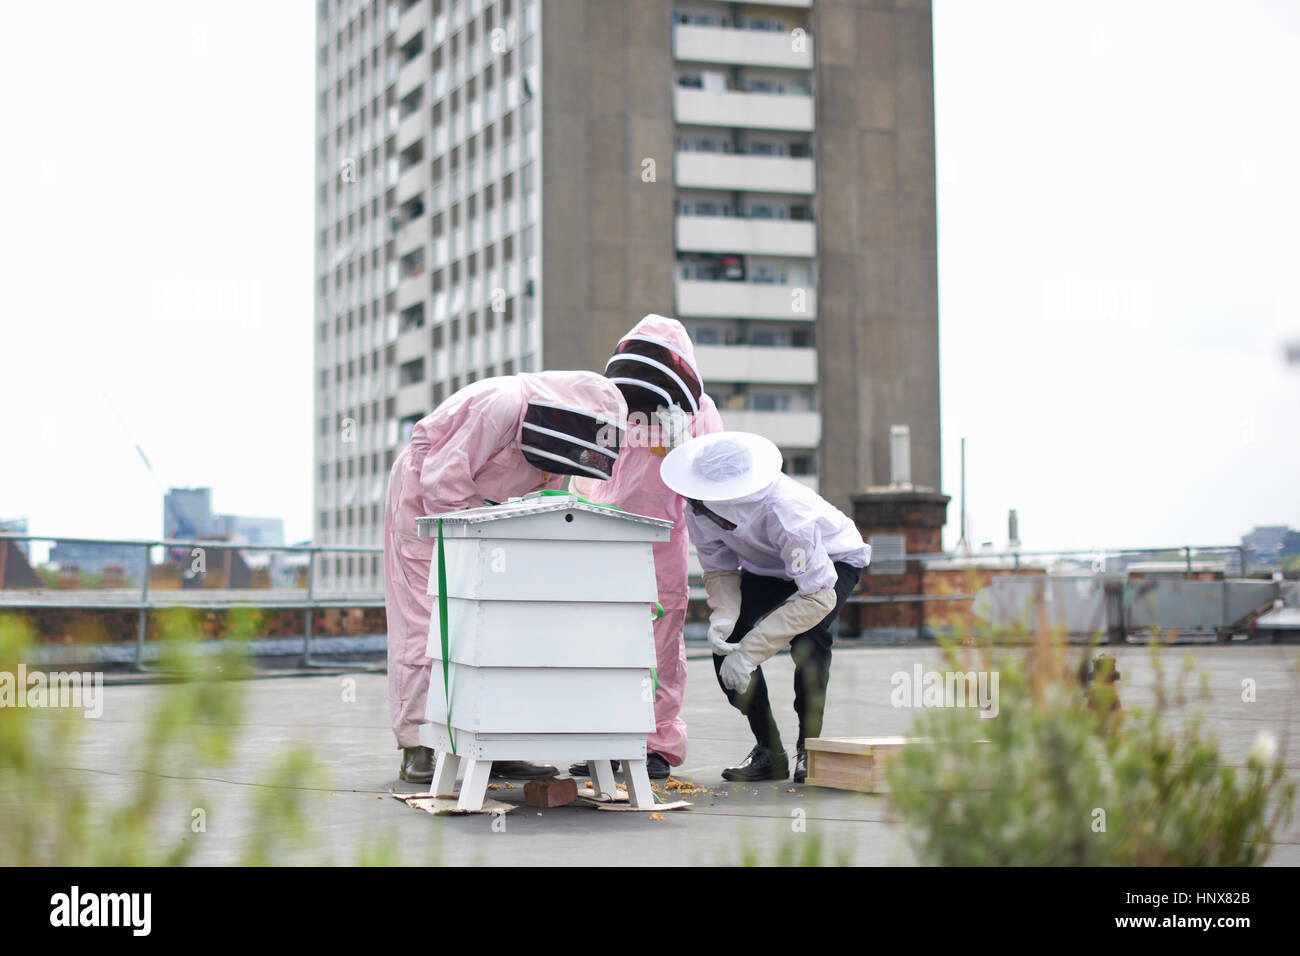 Group of beekeepers inspecting hive Stock Photo